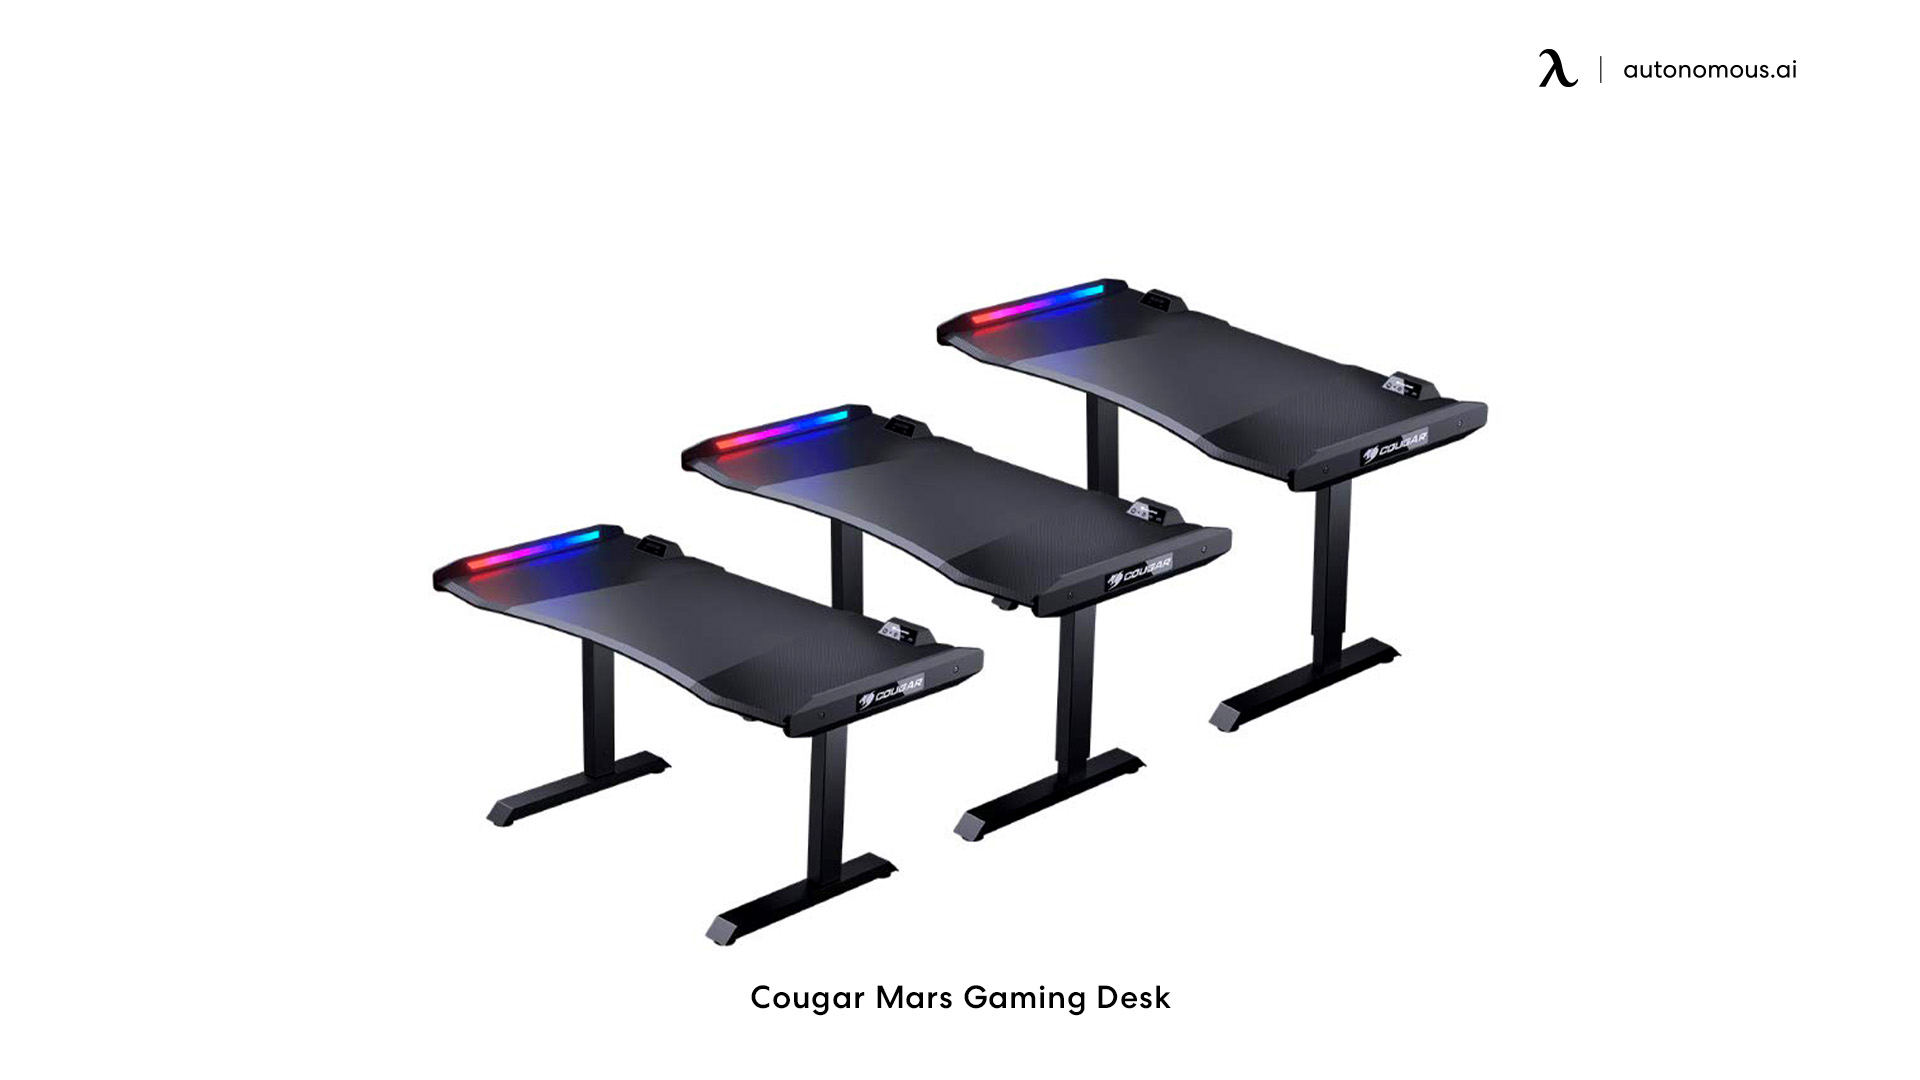 Cougar Mars gaming desk and chair combo